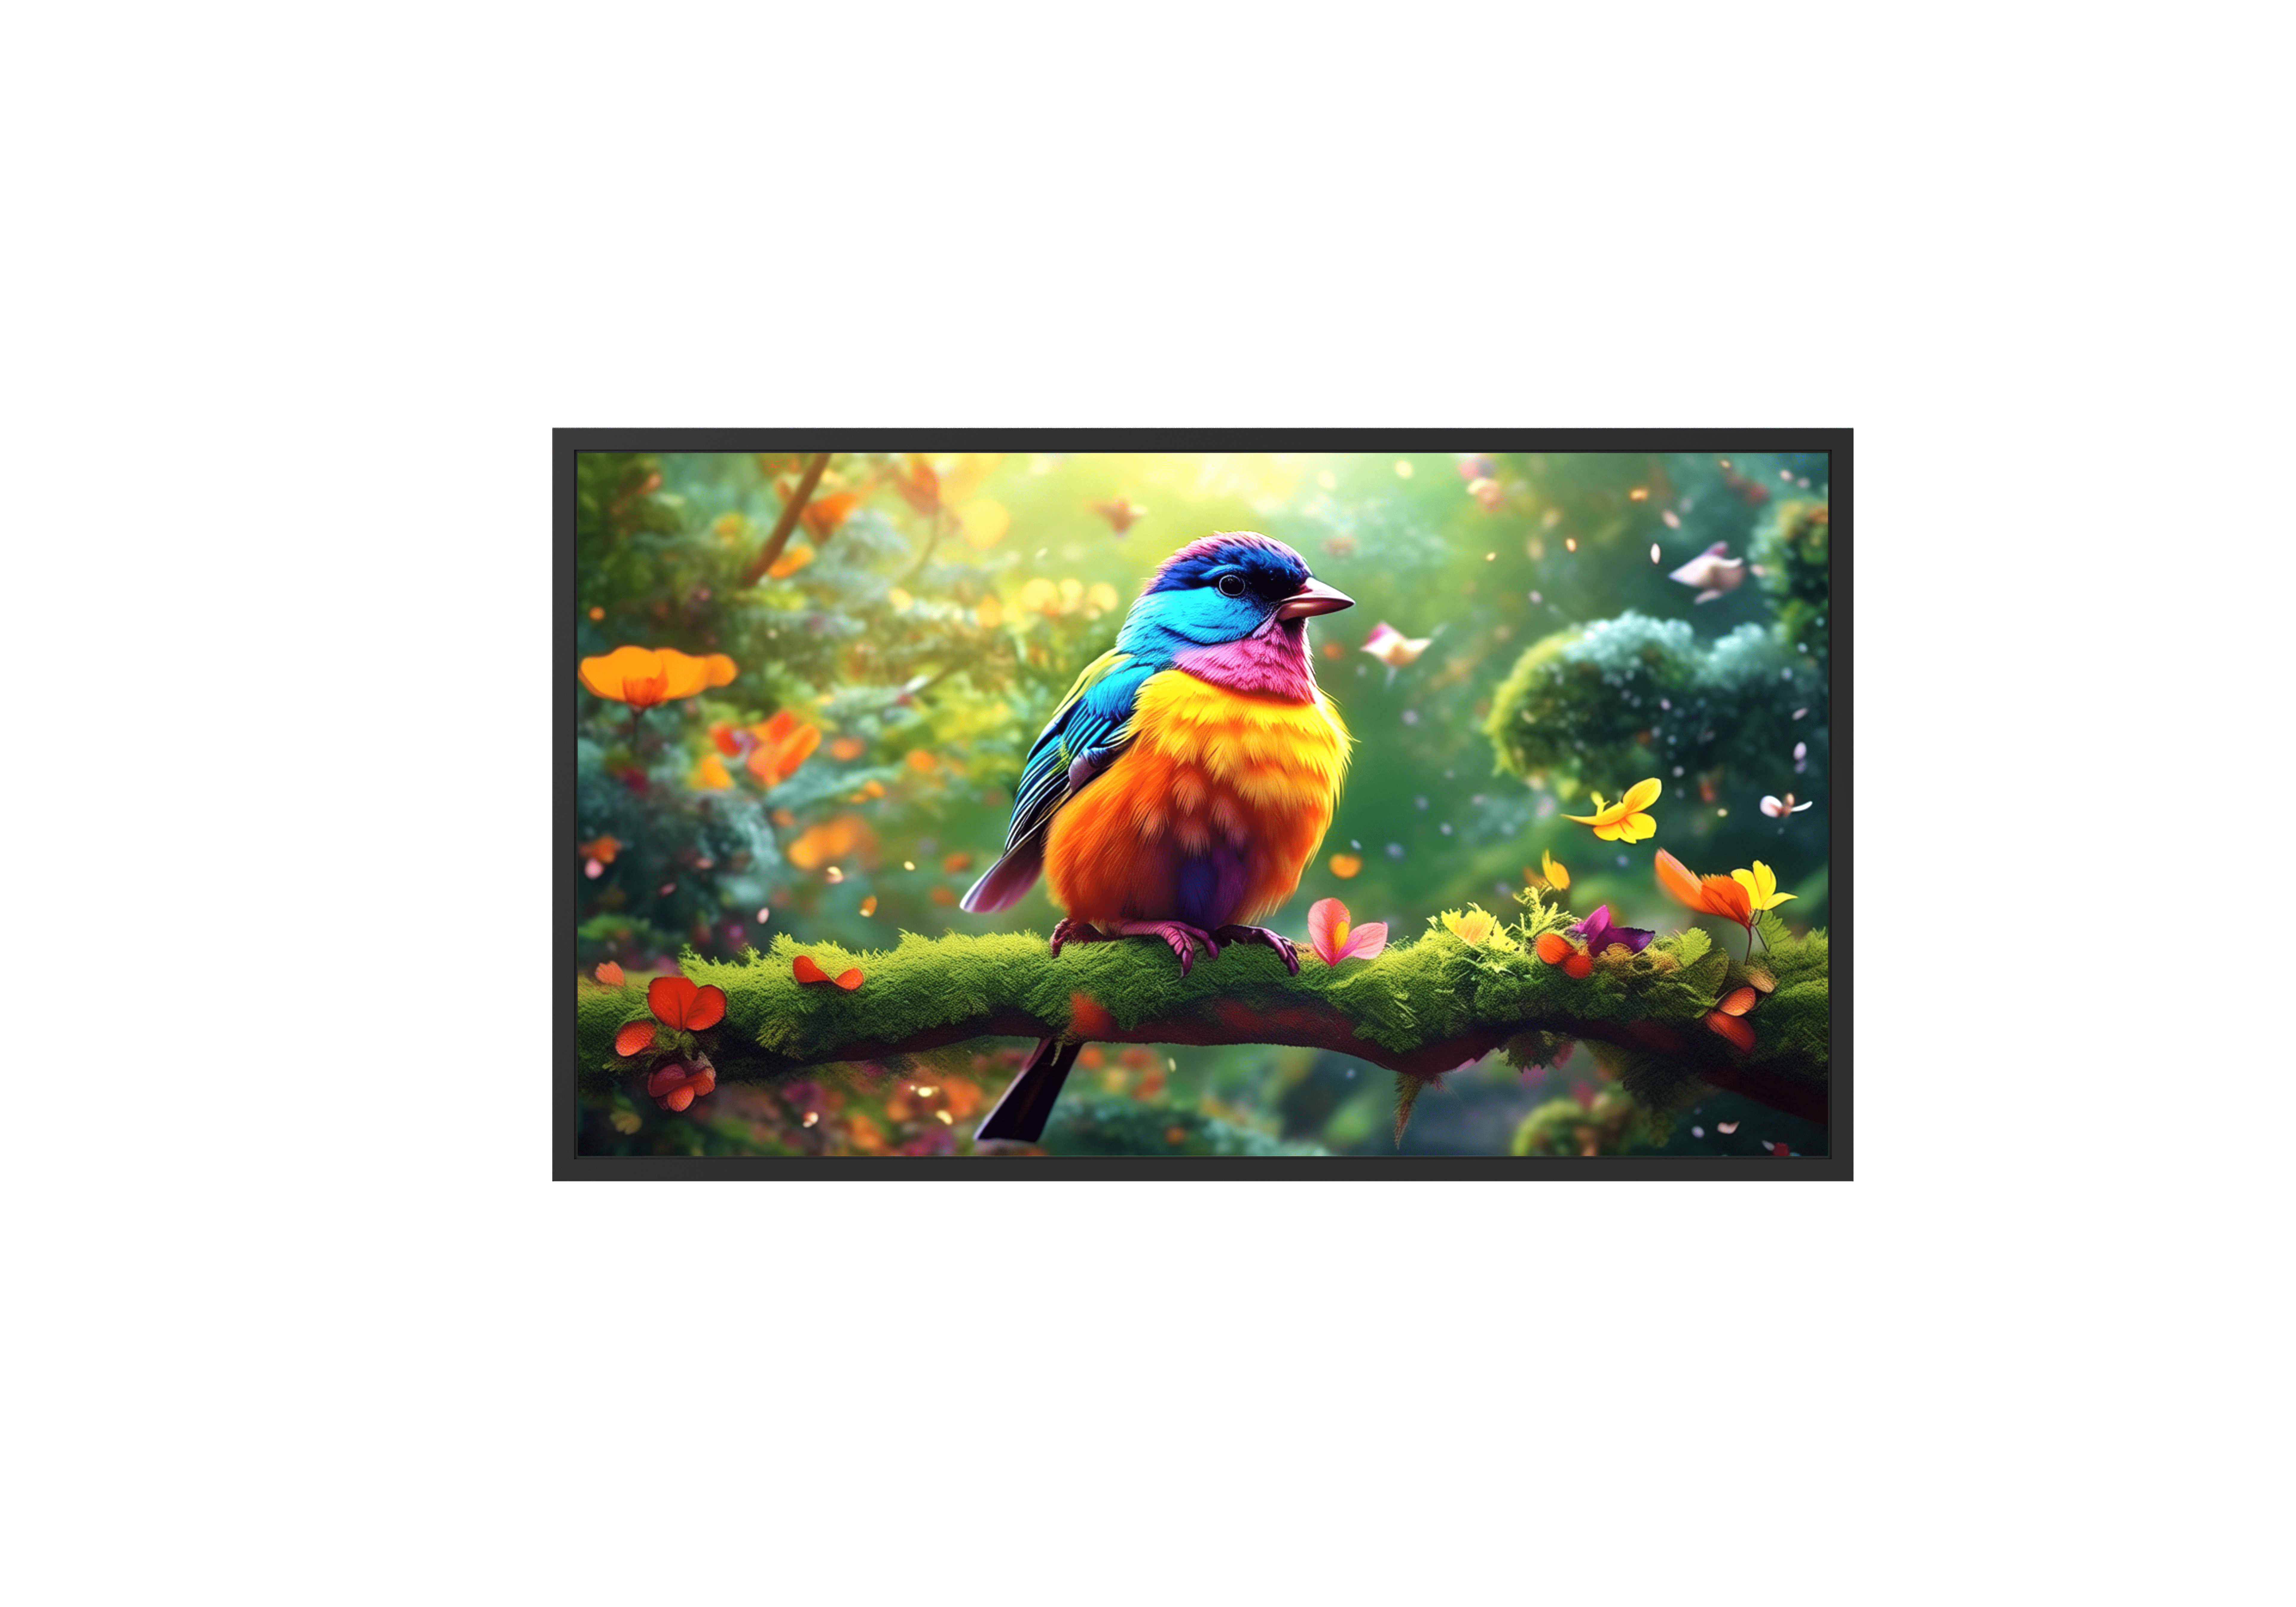 32 inch industrial high brightness LCD panel with thin bezel